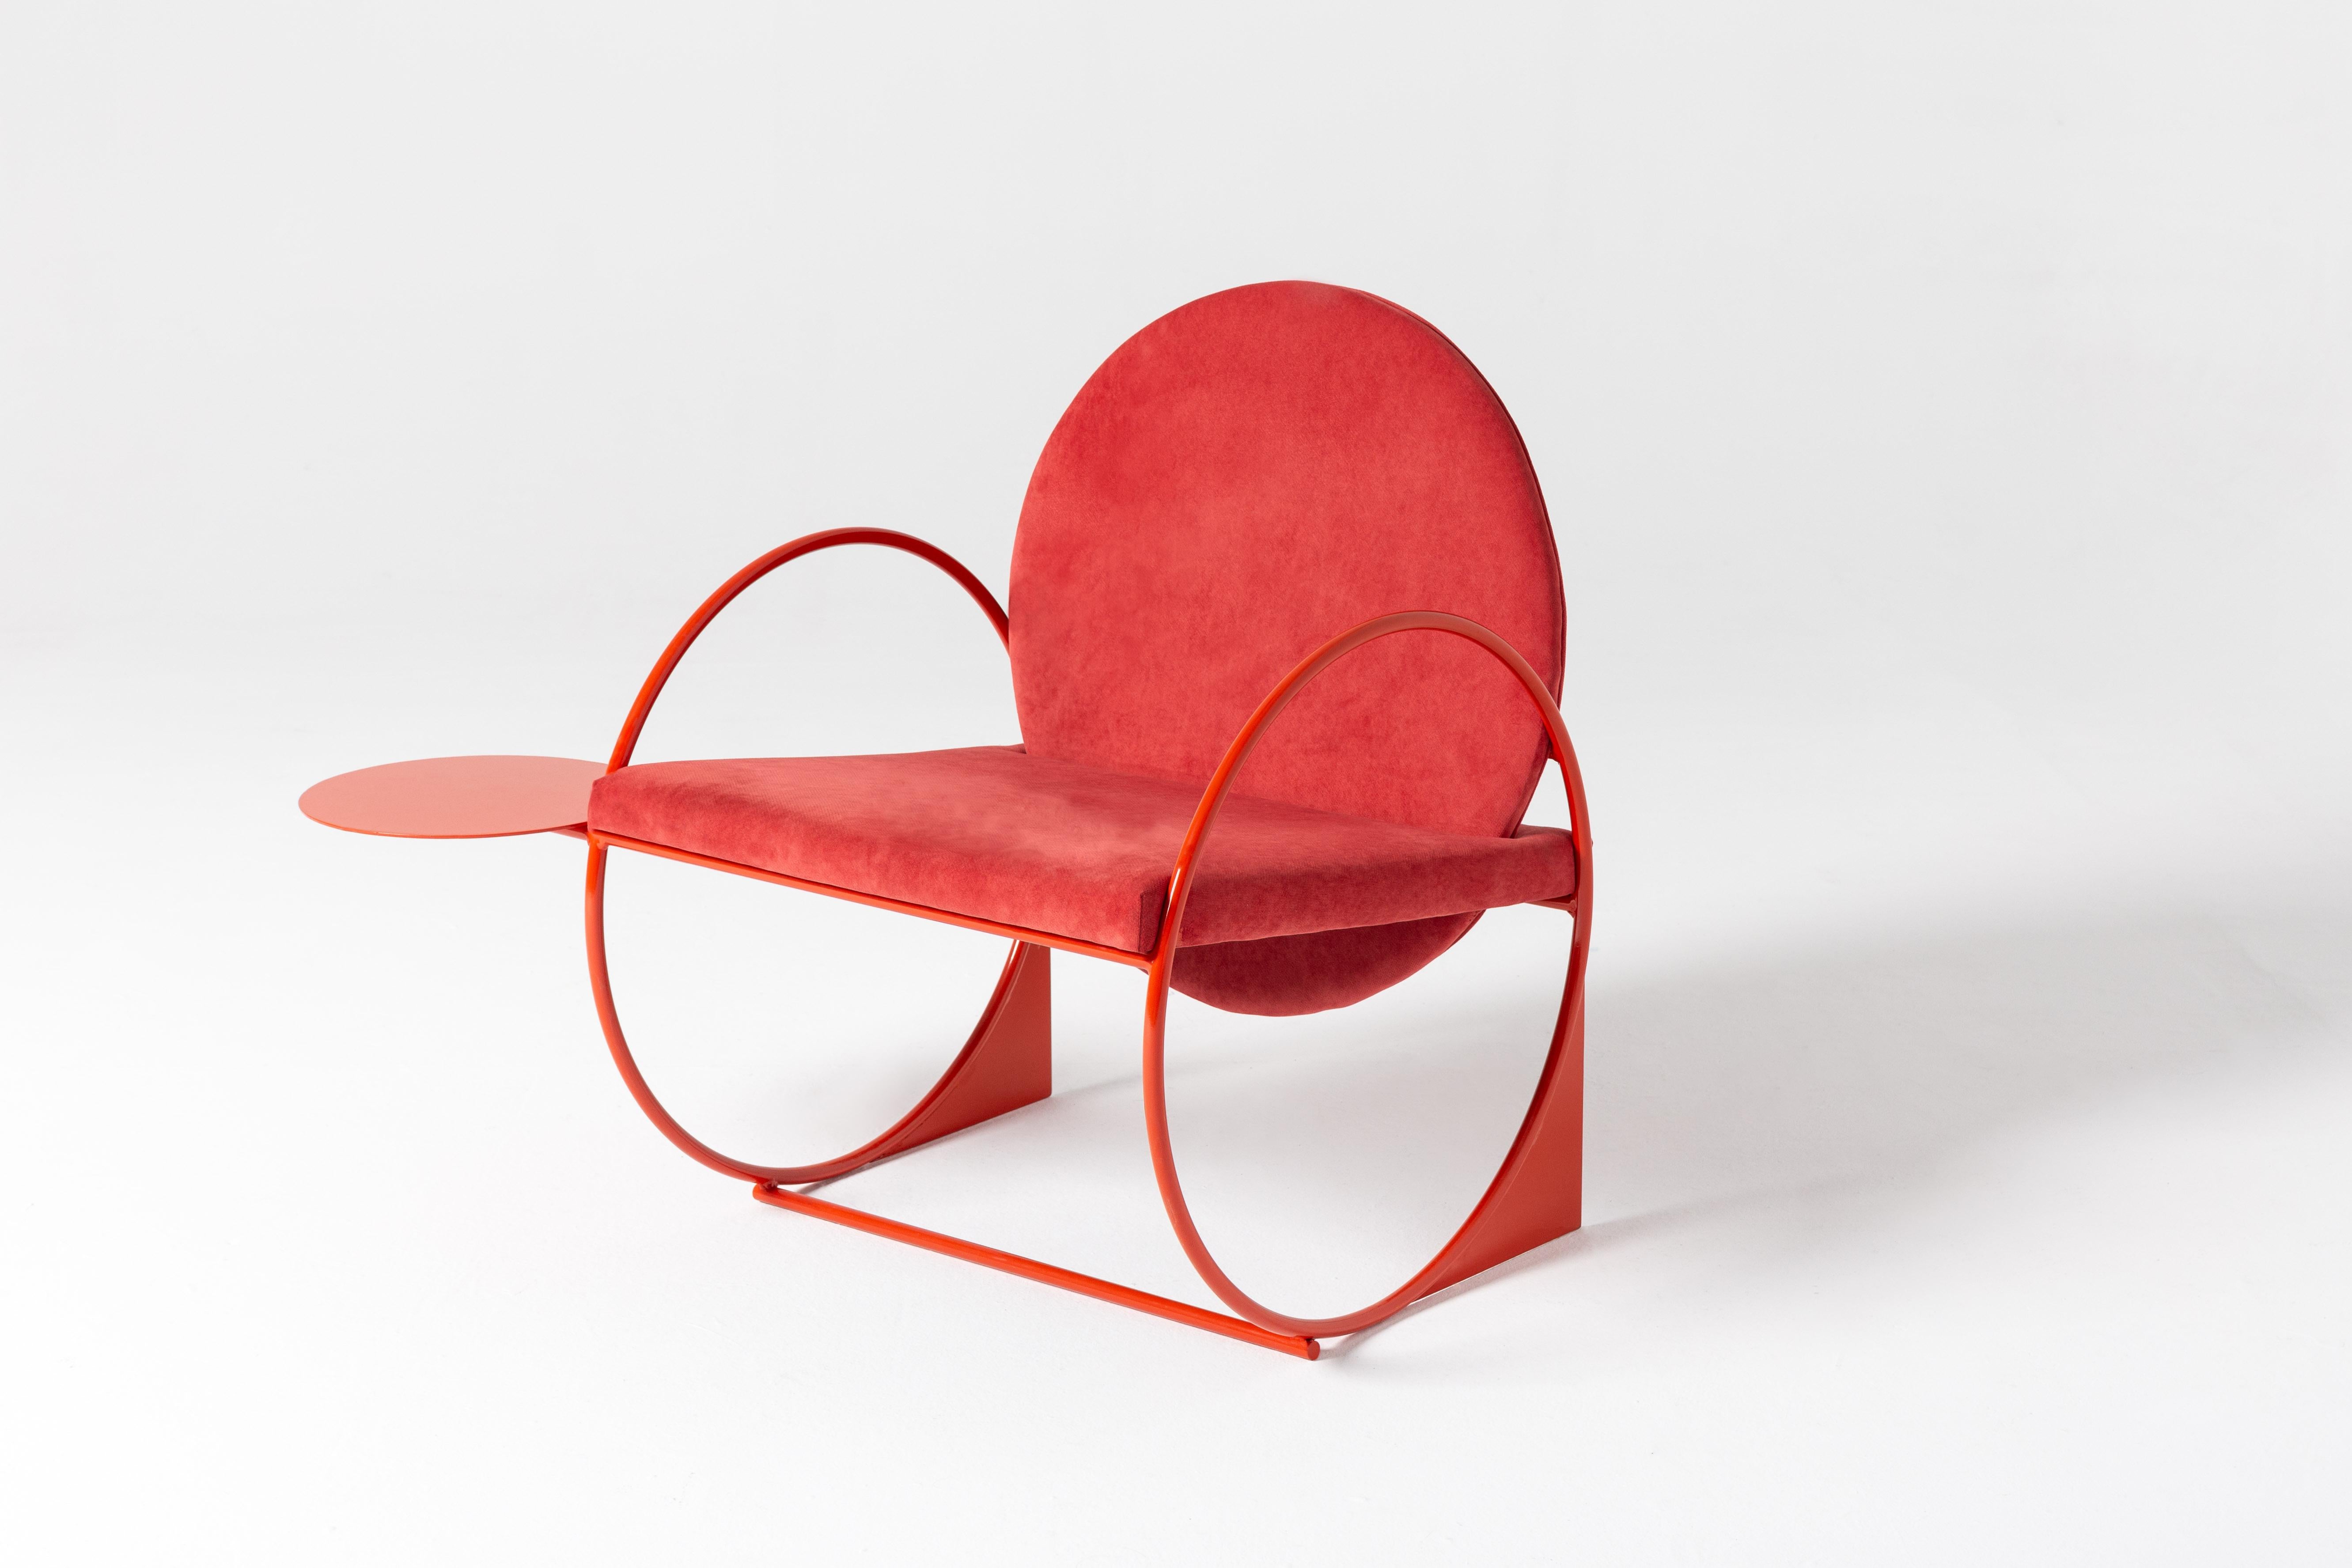 Bullarengue armchair by Ángel Mombiedro
Measures: cm : 100 x 70 x 40 seat 80 back cm 
Inches: 35 x 28 x 16 seat 32 back in
RAL metallic structure with synthetic velvet seat. Side-tray included
Can be made to order in other colors/dimensions upon